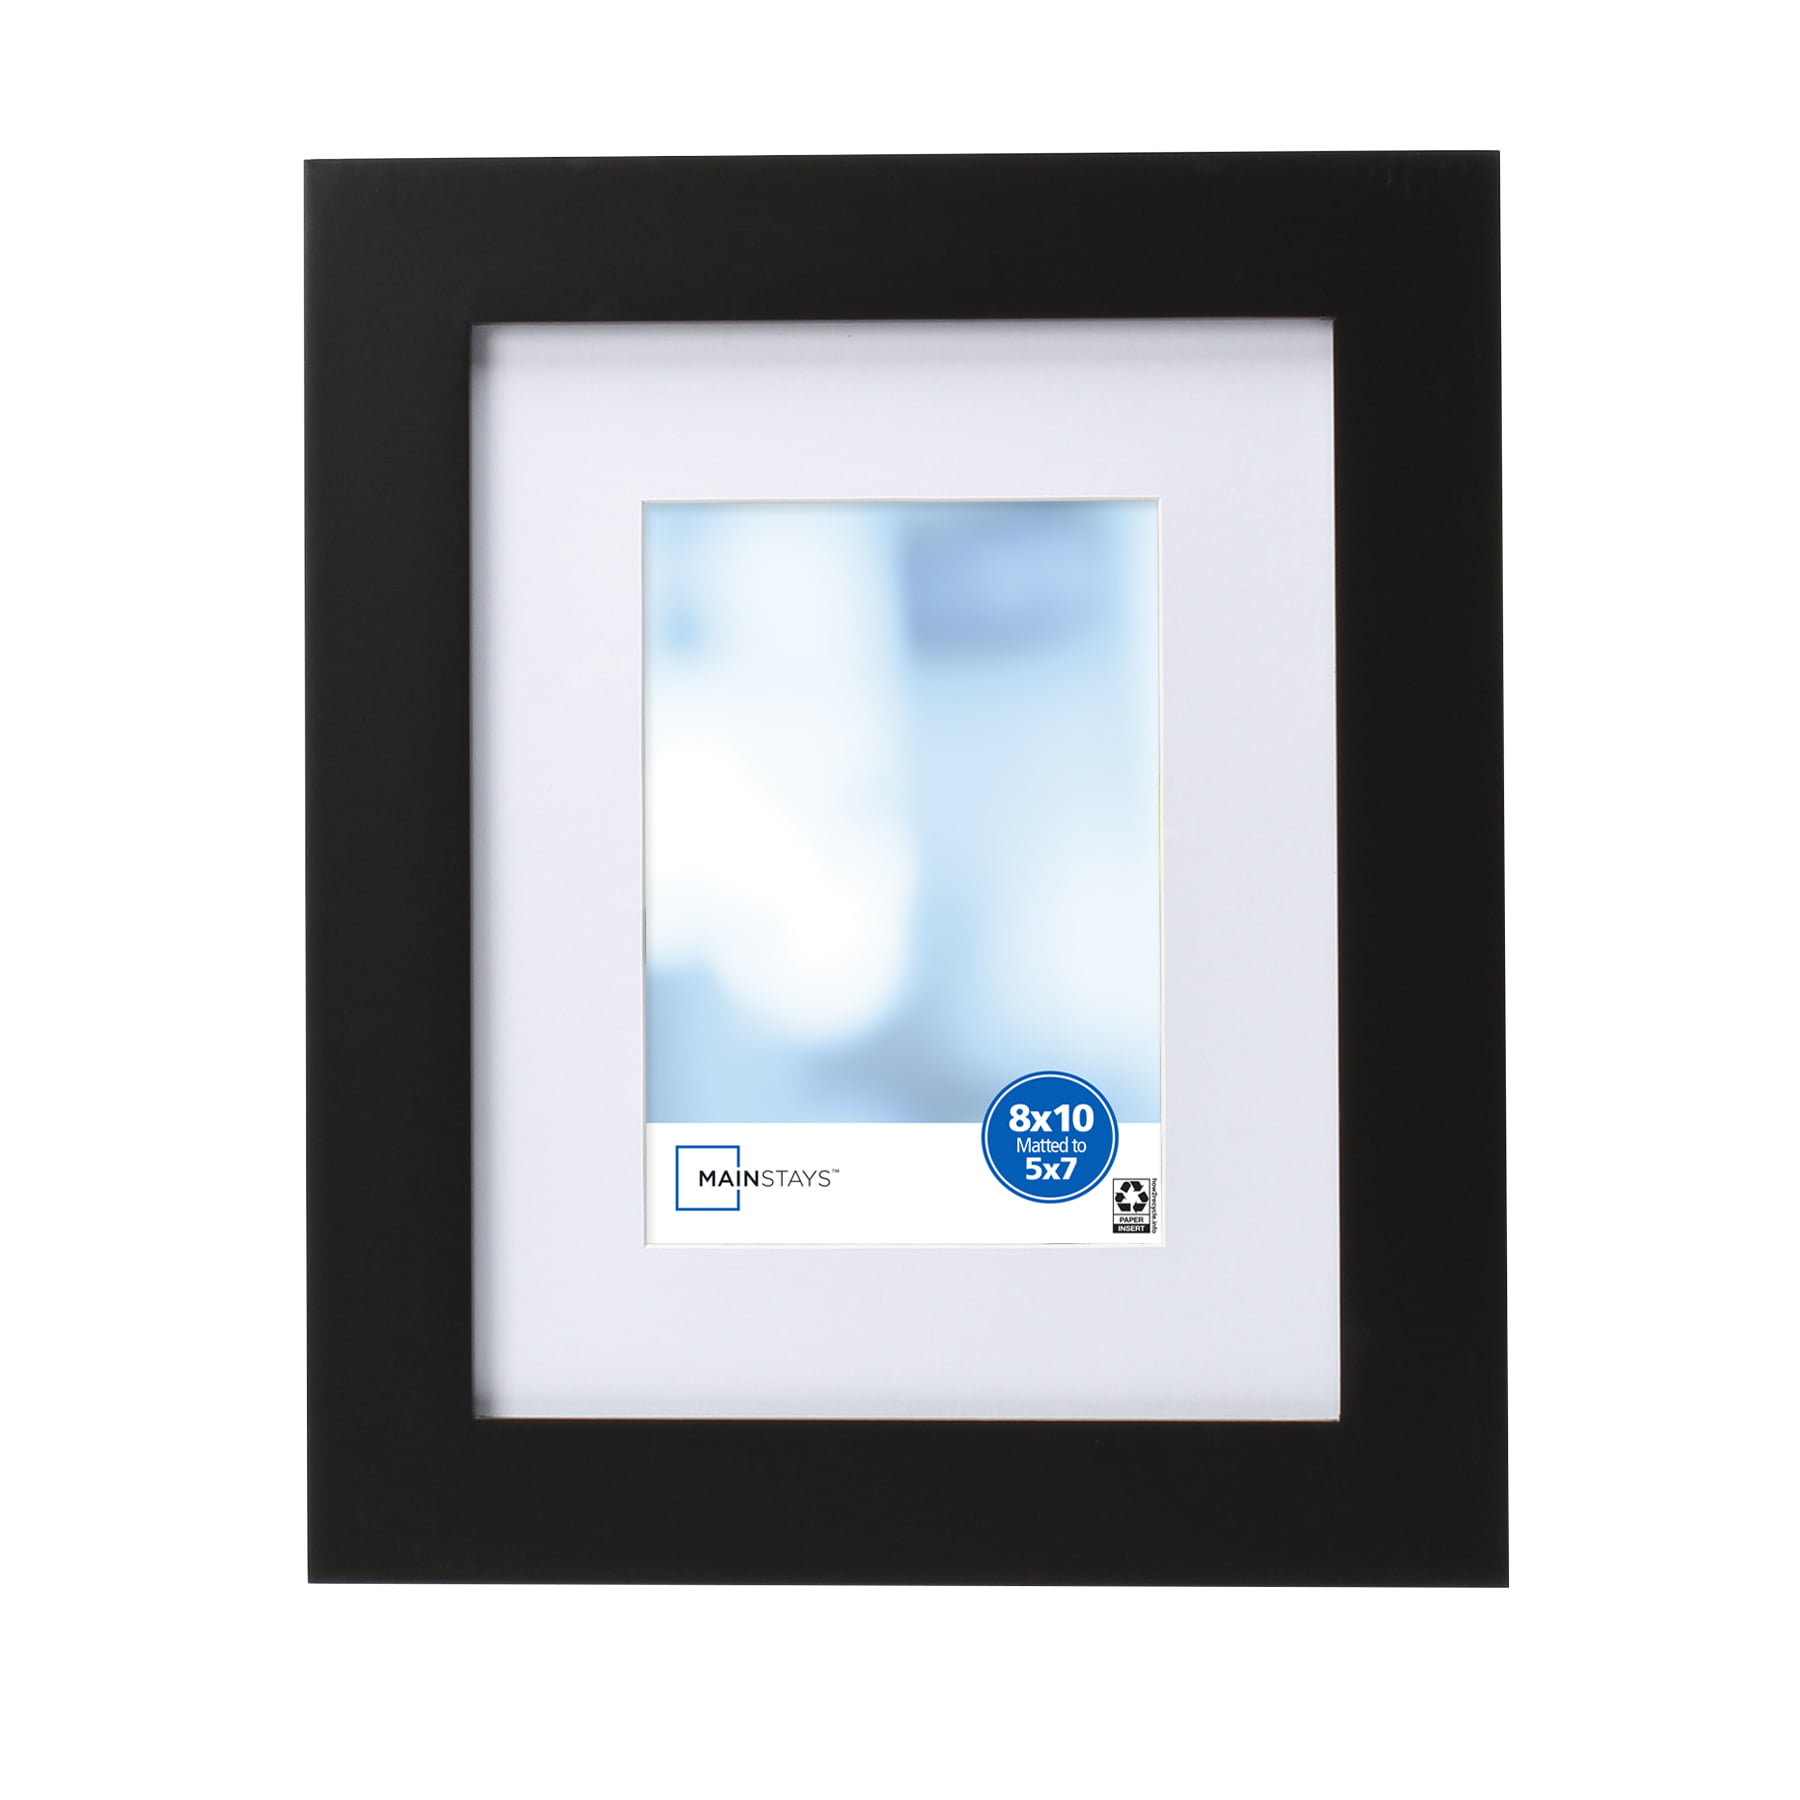 Details about   Mainstays 8x10 Linear Frame Black W